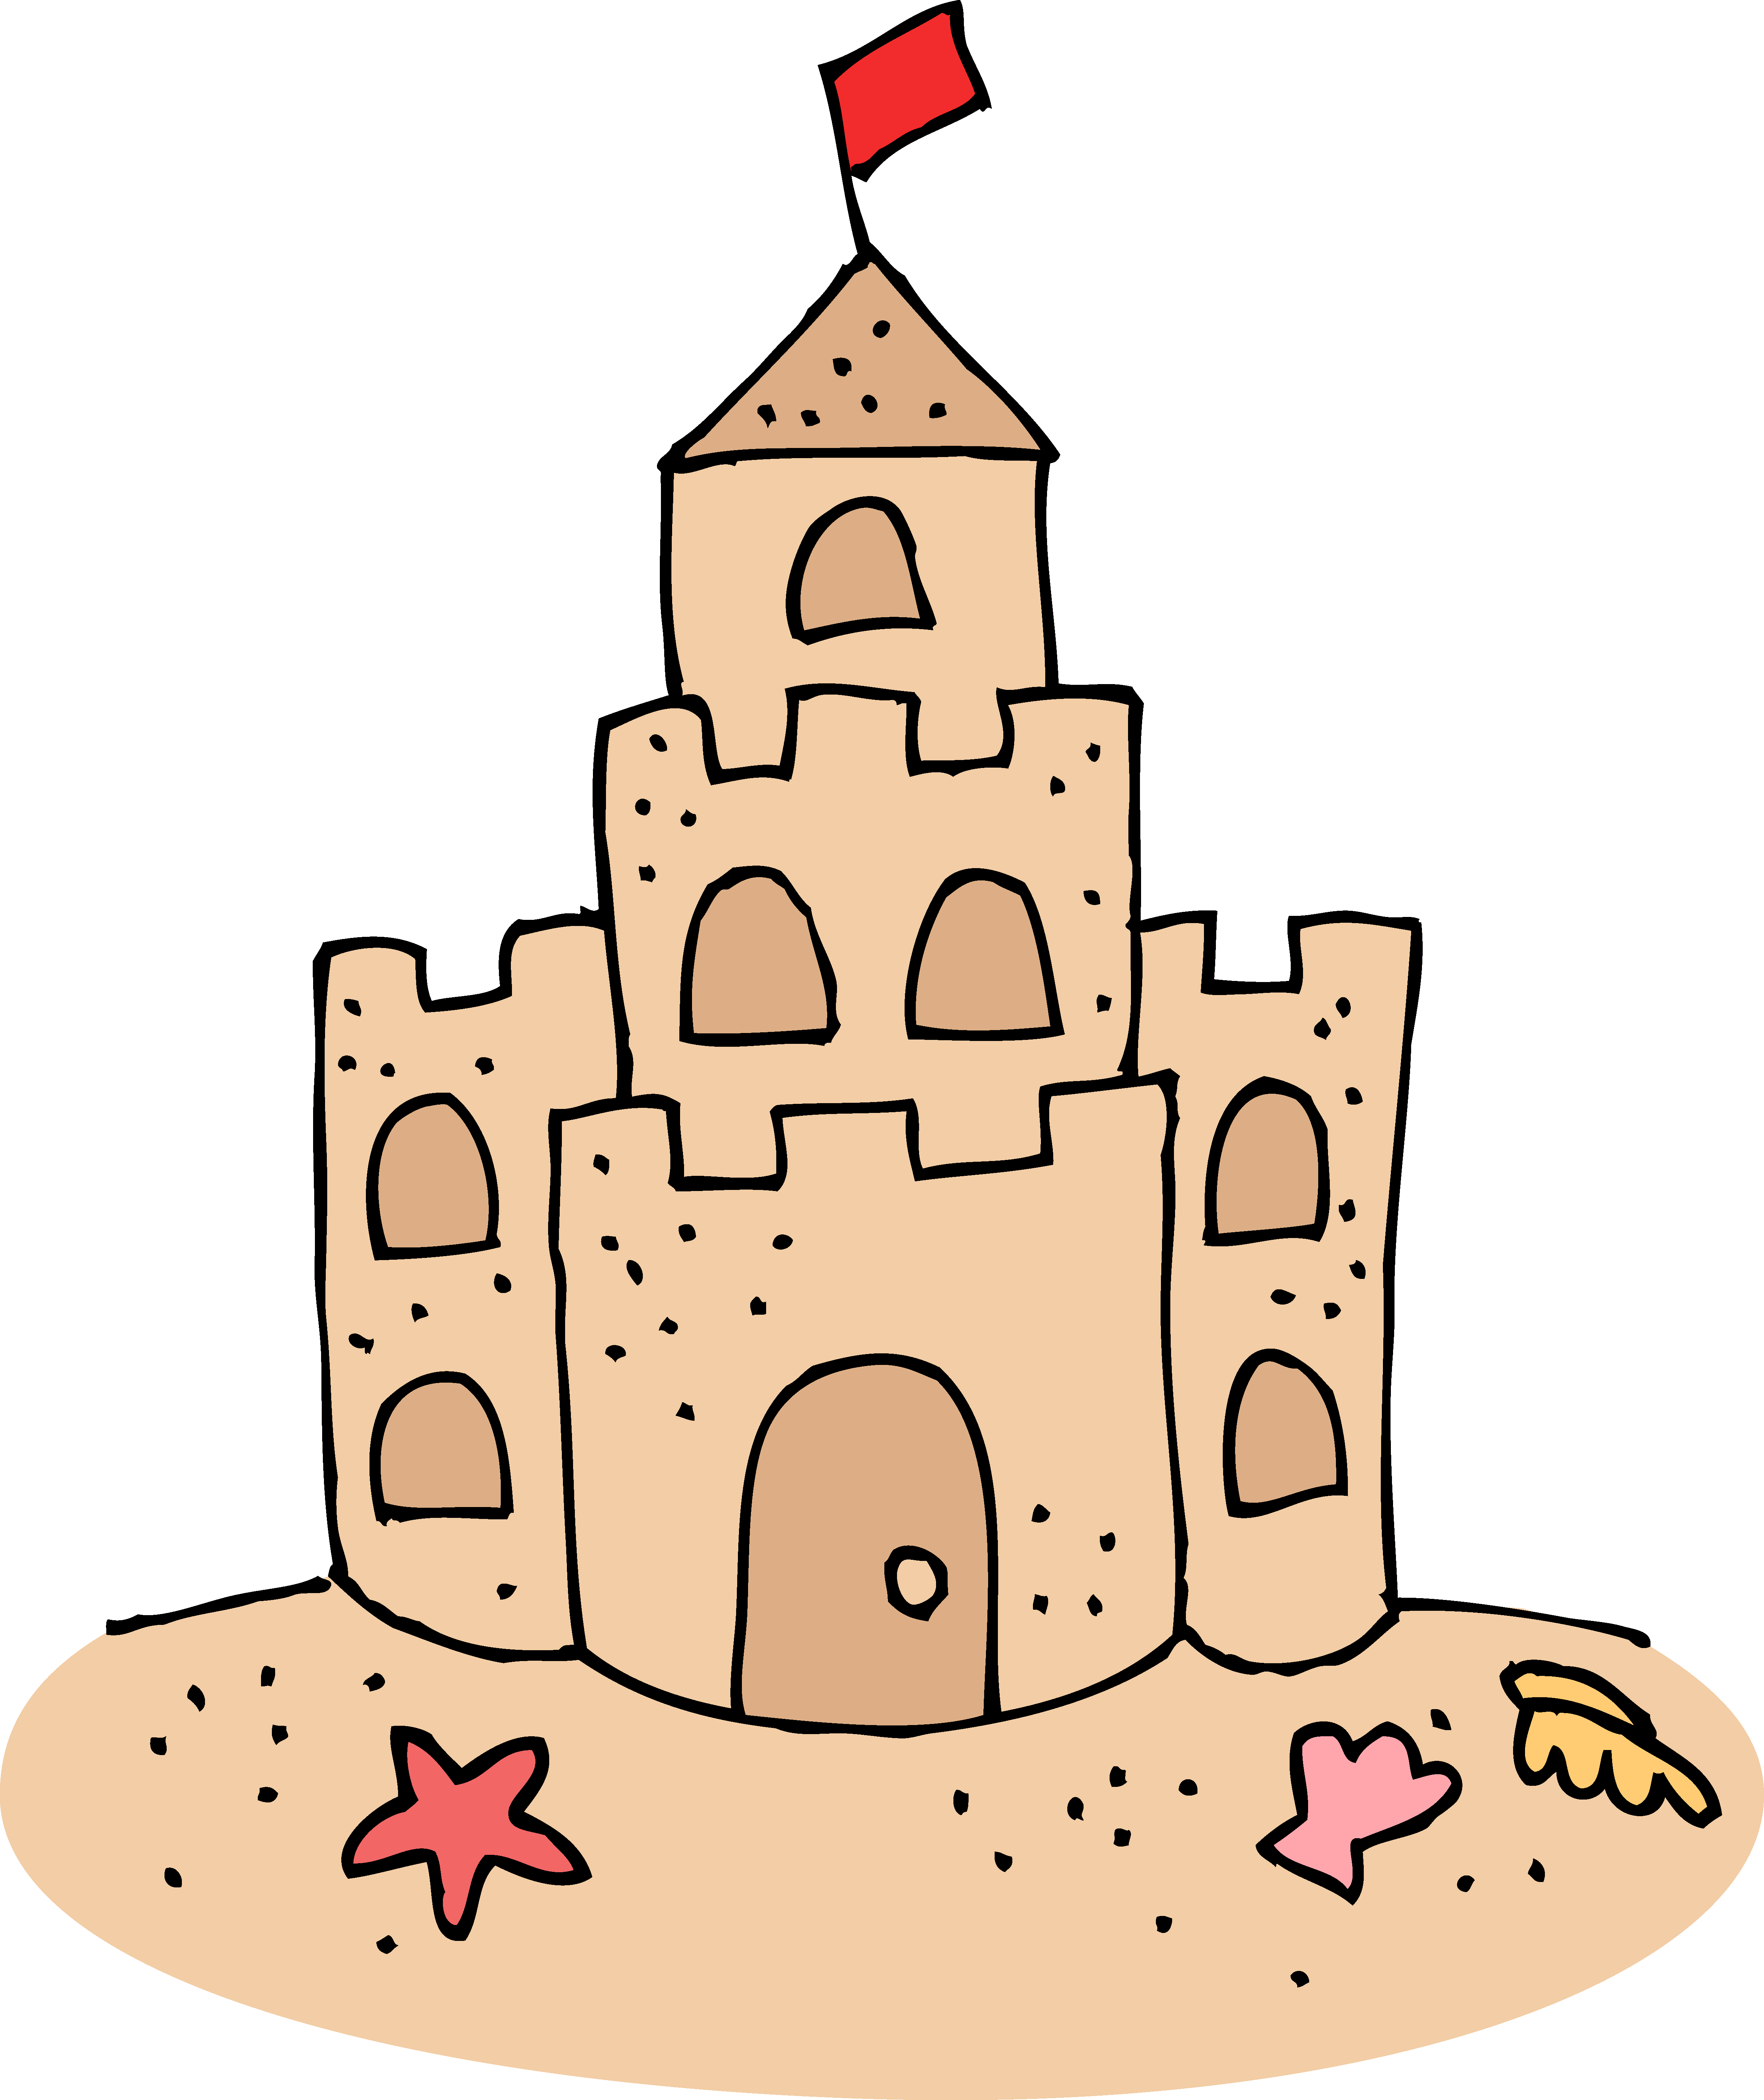 Pix For > Animated Sand Castles